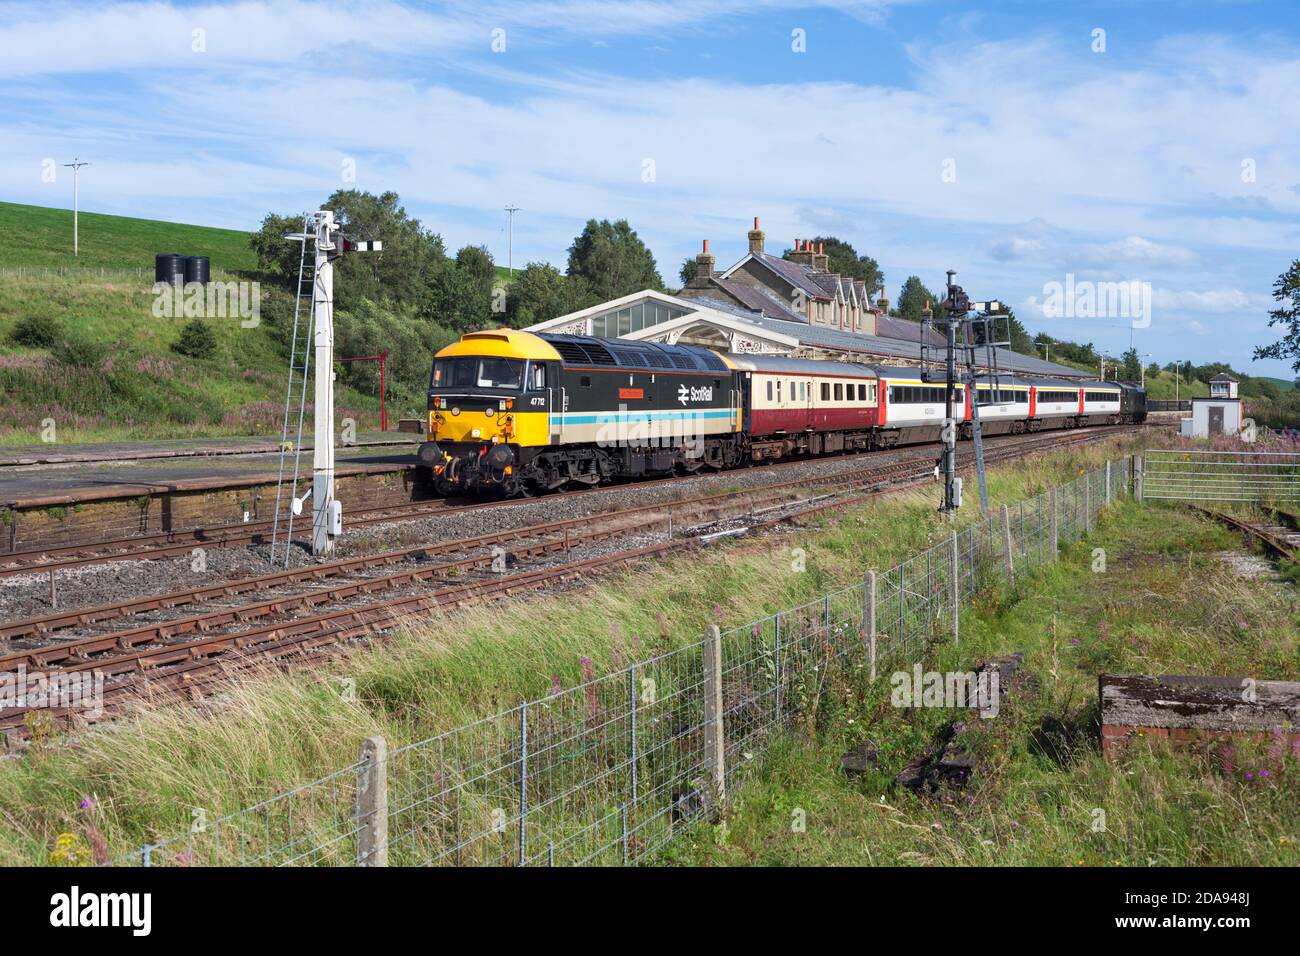 Locomotive services class 47 locomotive 47712 passing the Midland railway station at Hellifield with the 'Staycation Express' tourist train Stock Photo